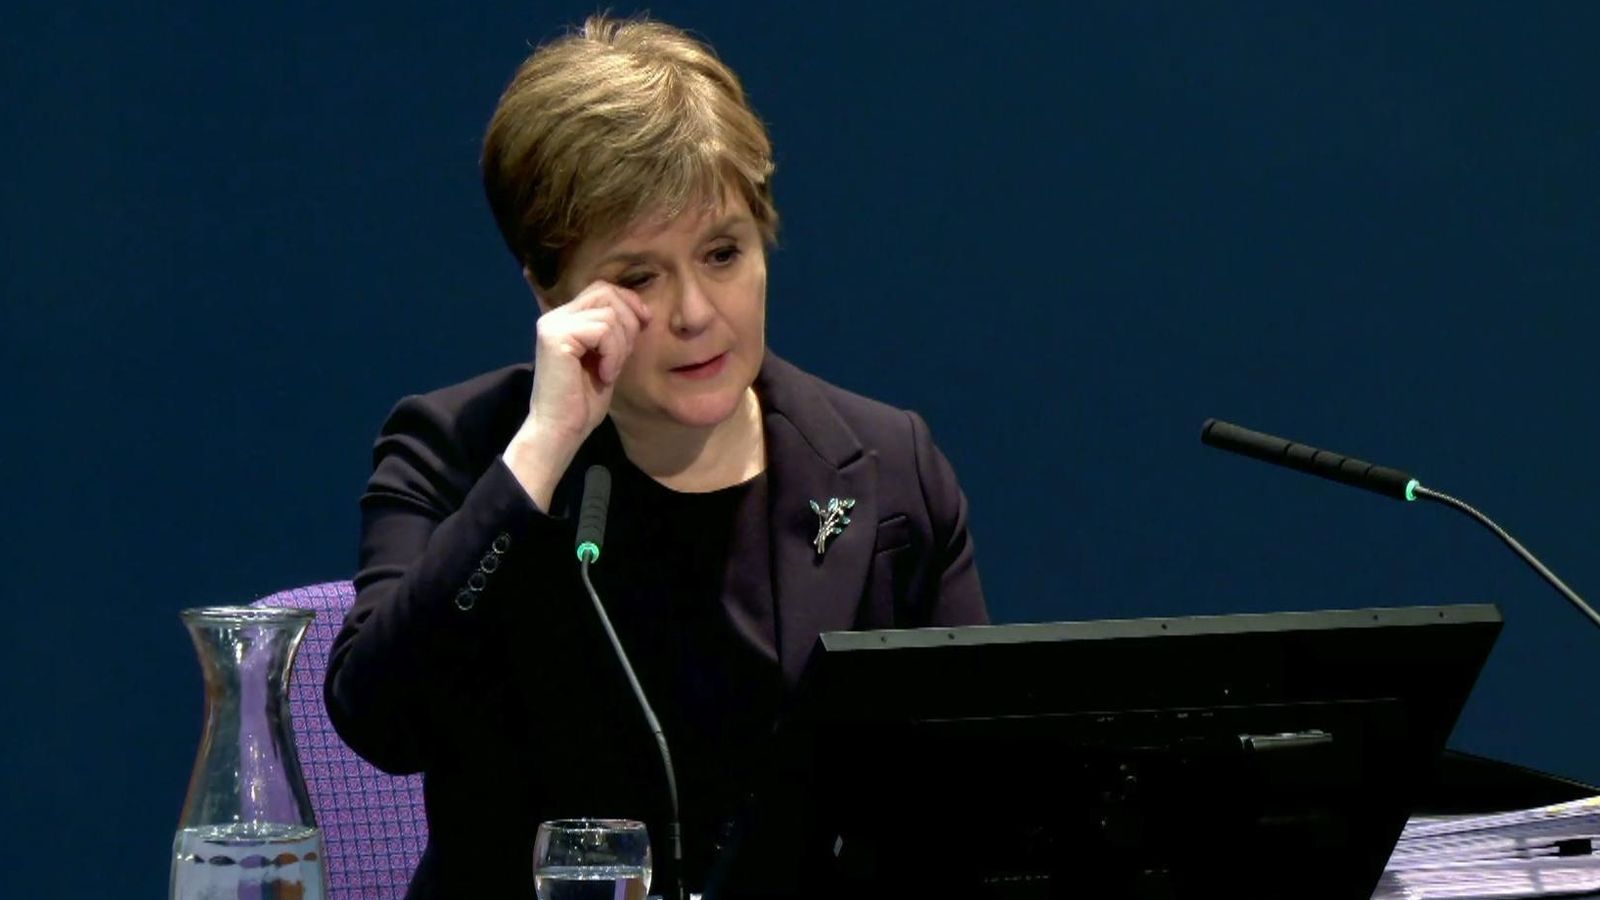 COVID Inquiry: 'Nicola Sturgeon could cry from one eye if she wanted to,' says Scottish Secretary Alister Jack